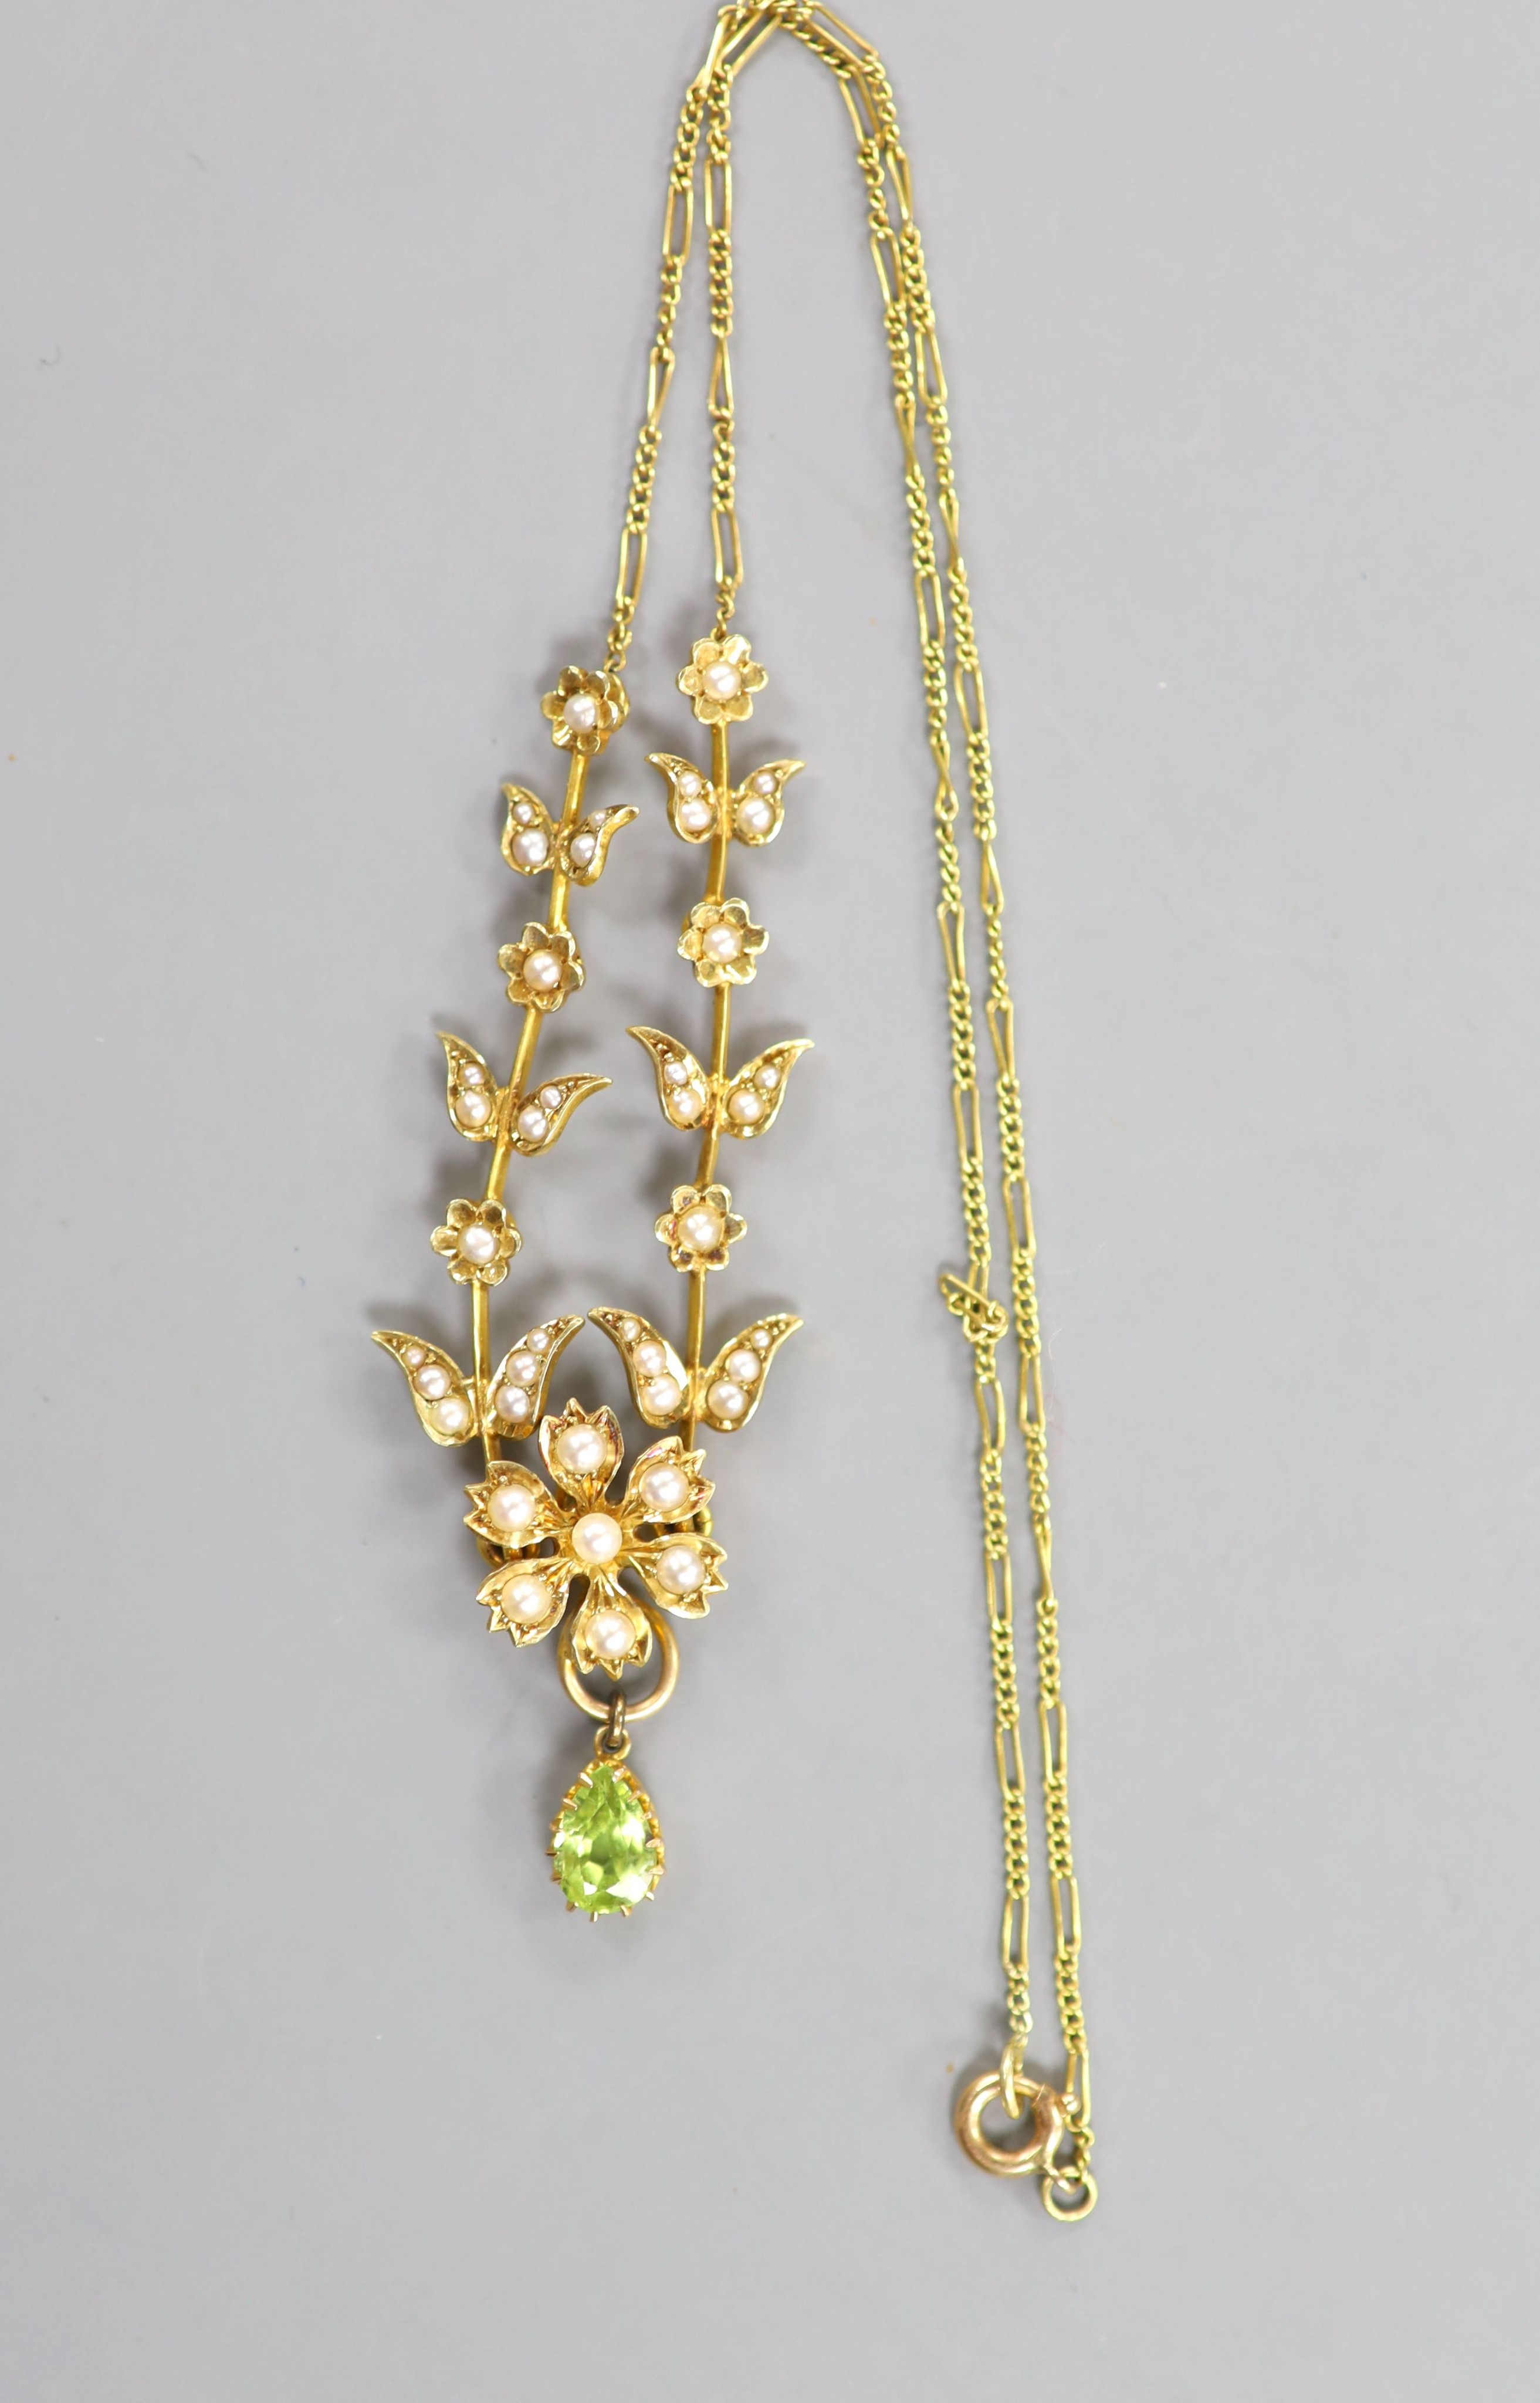 An Edwardian 15ct, seed pearl and pear cut peridot drop set necklace, 40cm